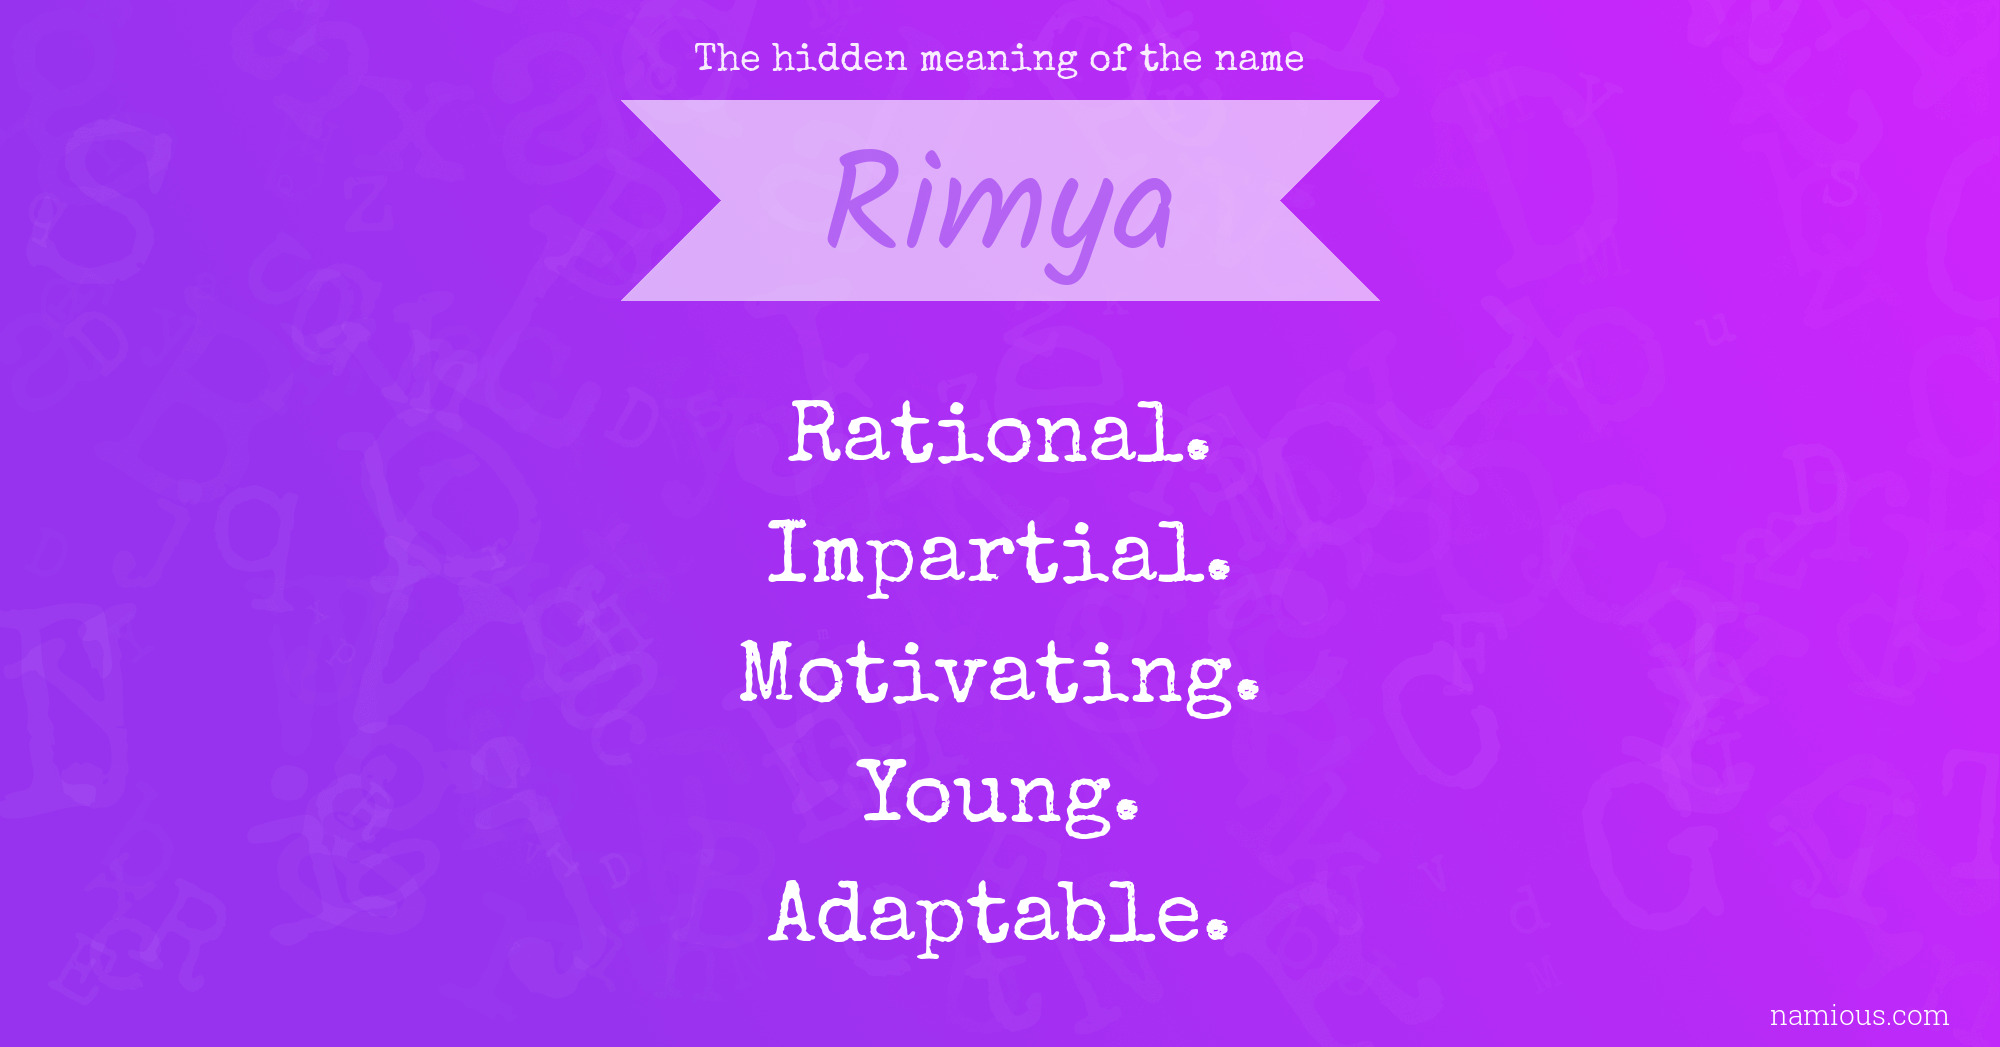 The hidden meaning of the name Rimya